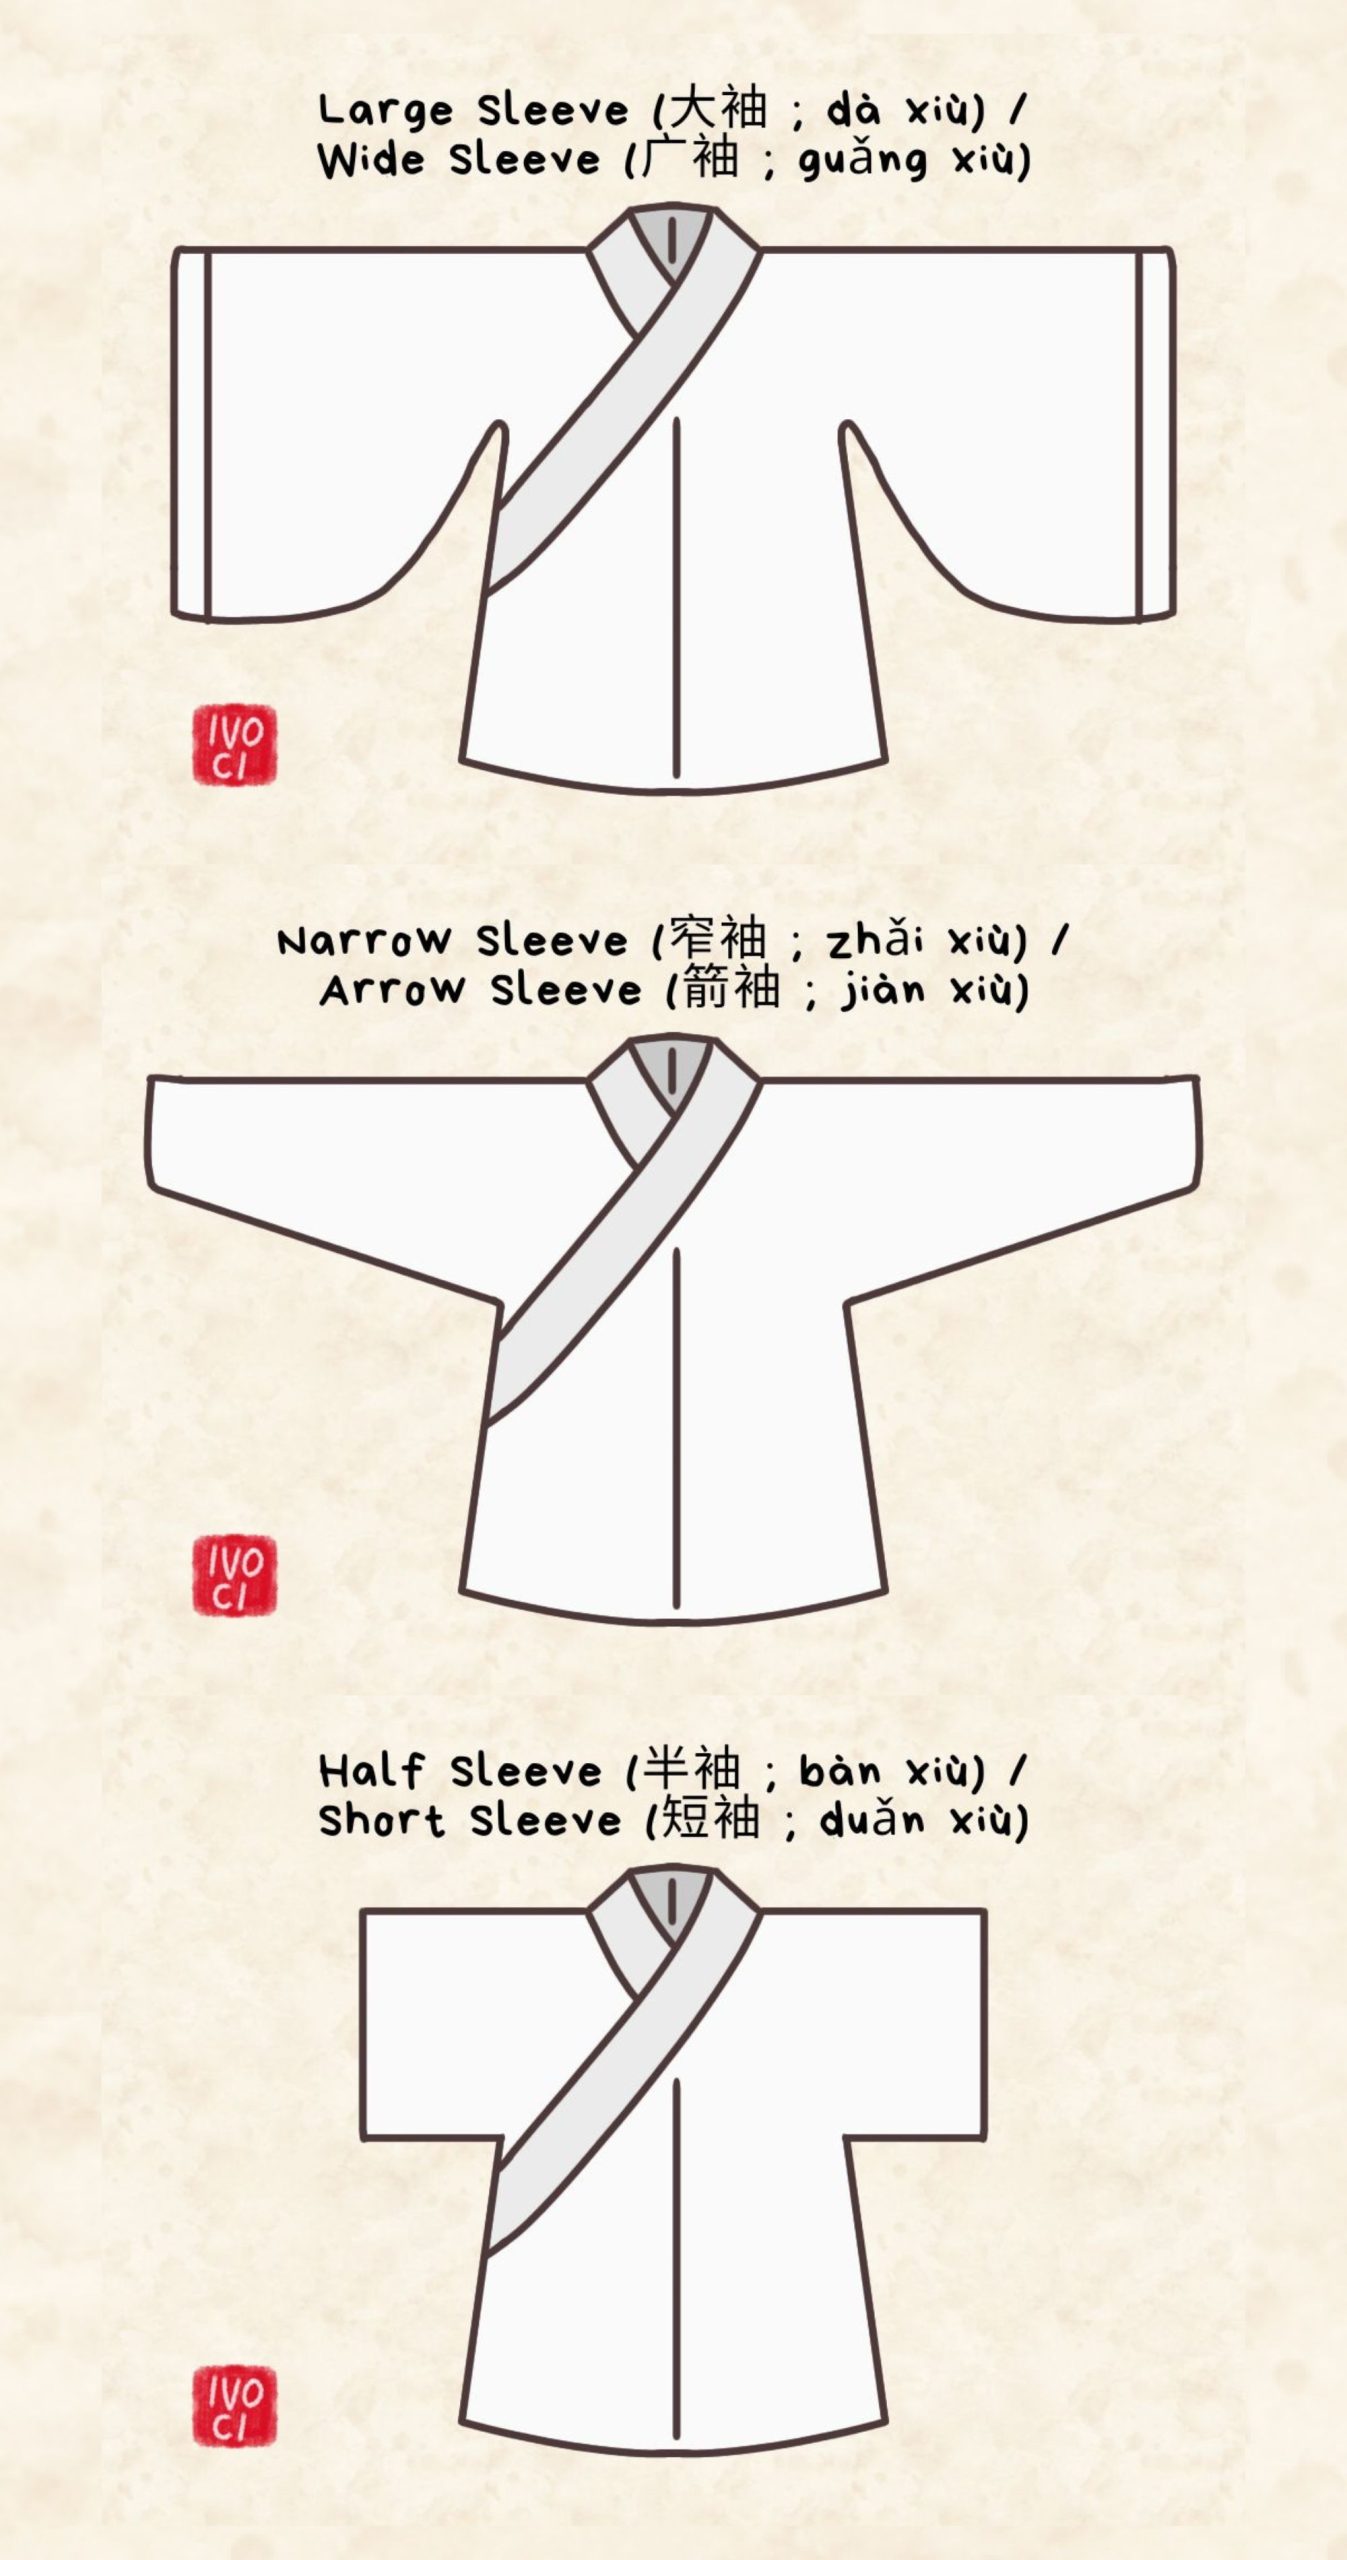 ivoci - Easily Confused Hanfu Structures - 2